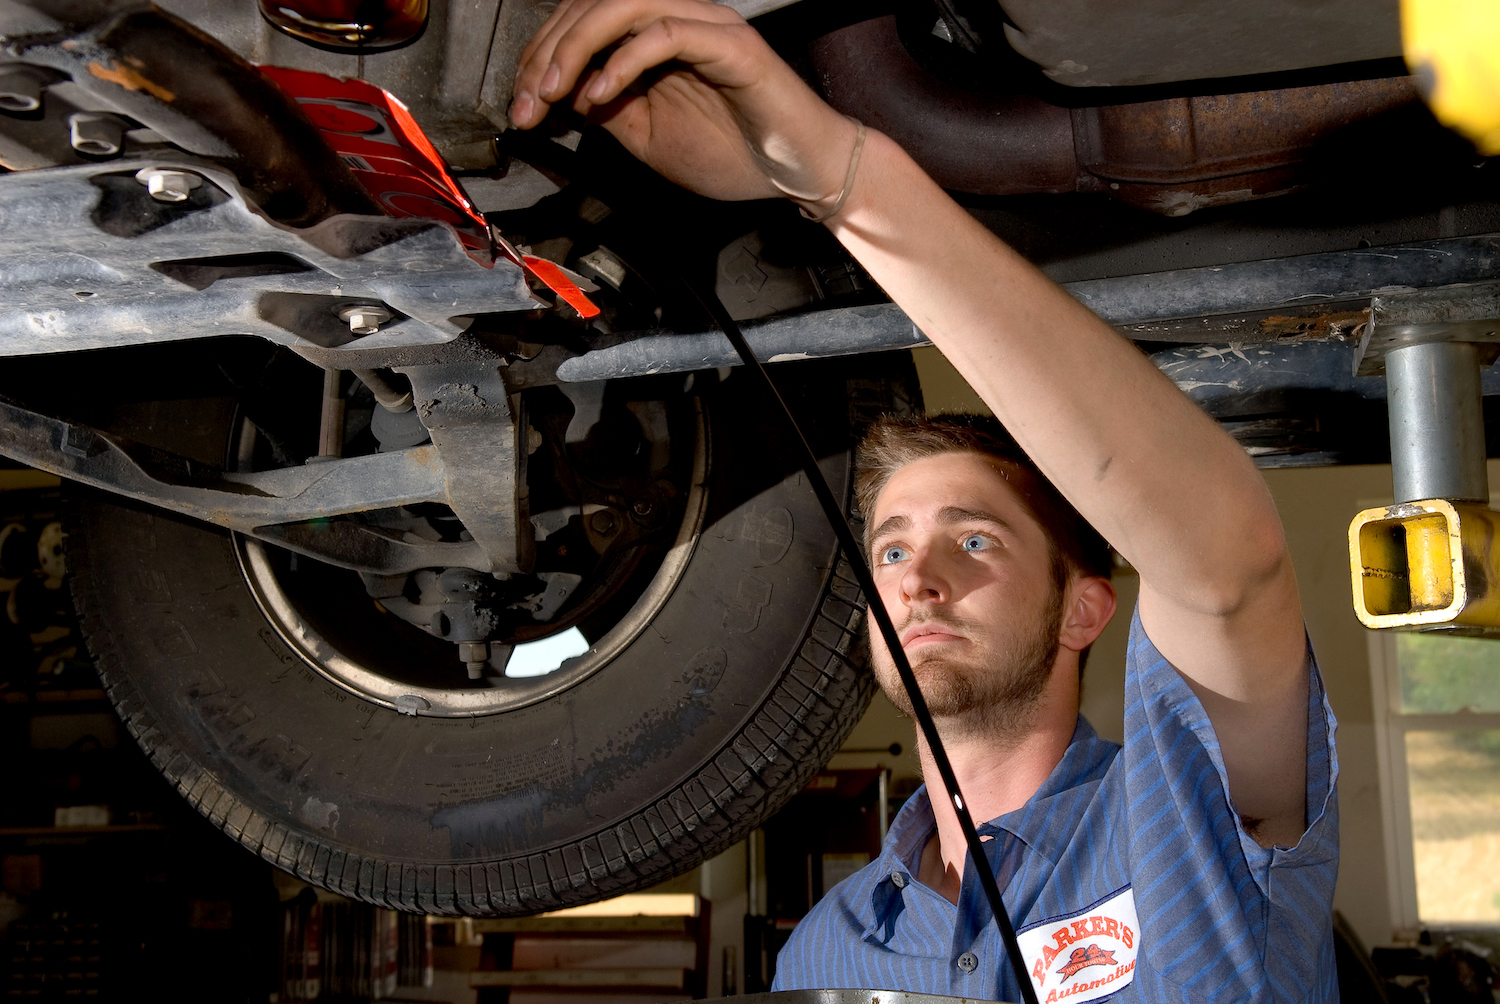 An auto technician maintains a vehicle on an overhead lift, one of its tires visible behind him.